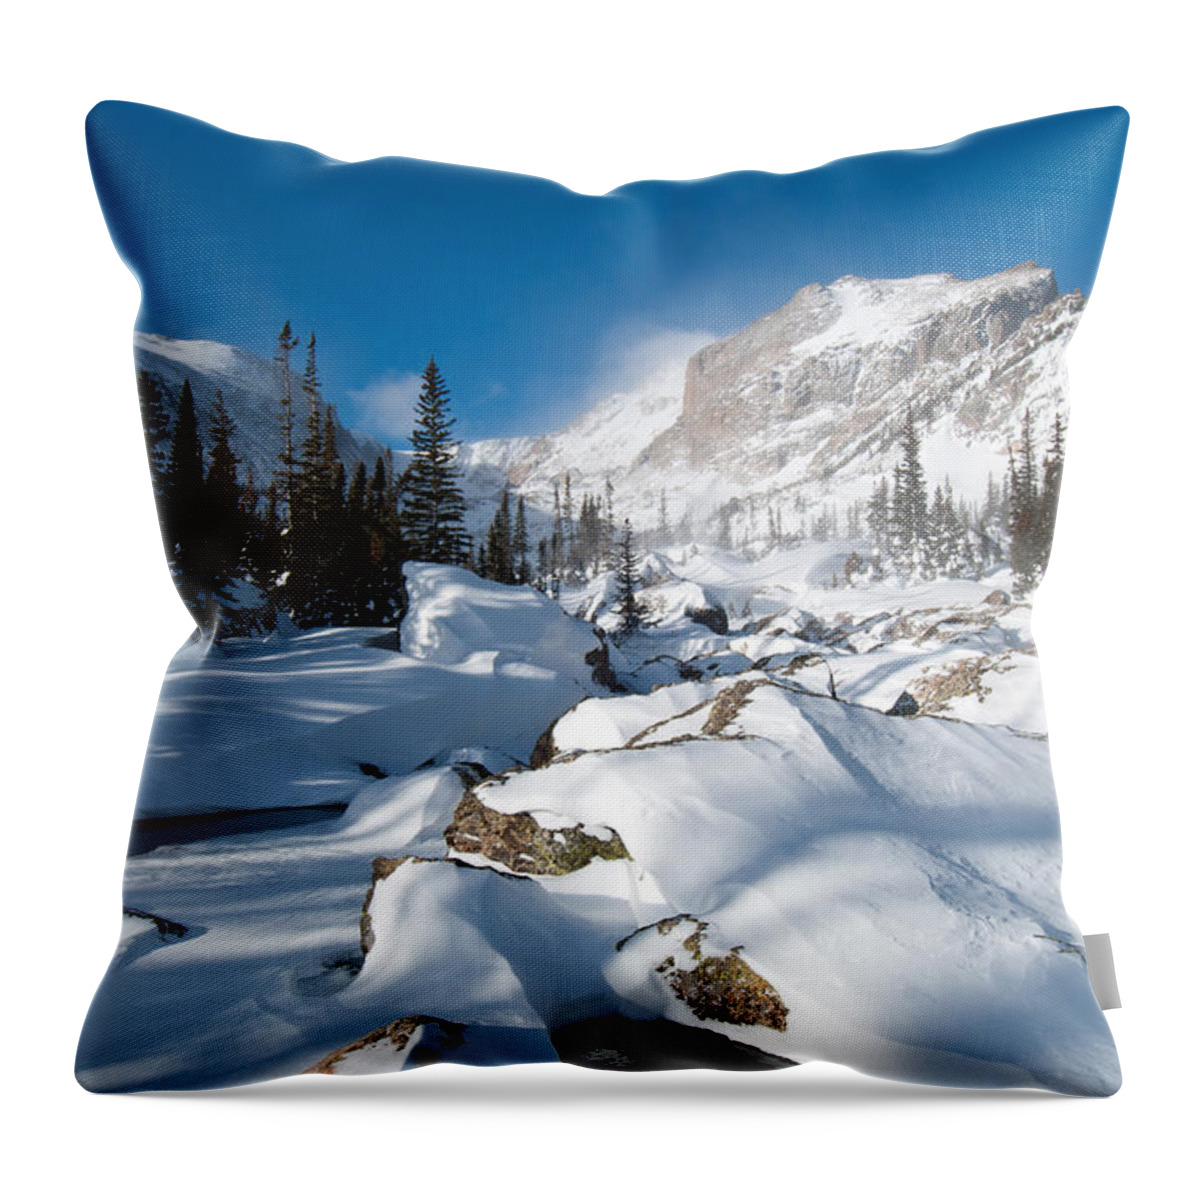 Colorado Throw Pillow featuring the photograph A Winter Morning in the Mountains by Cascade Colors